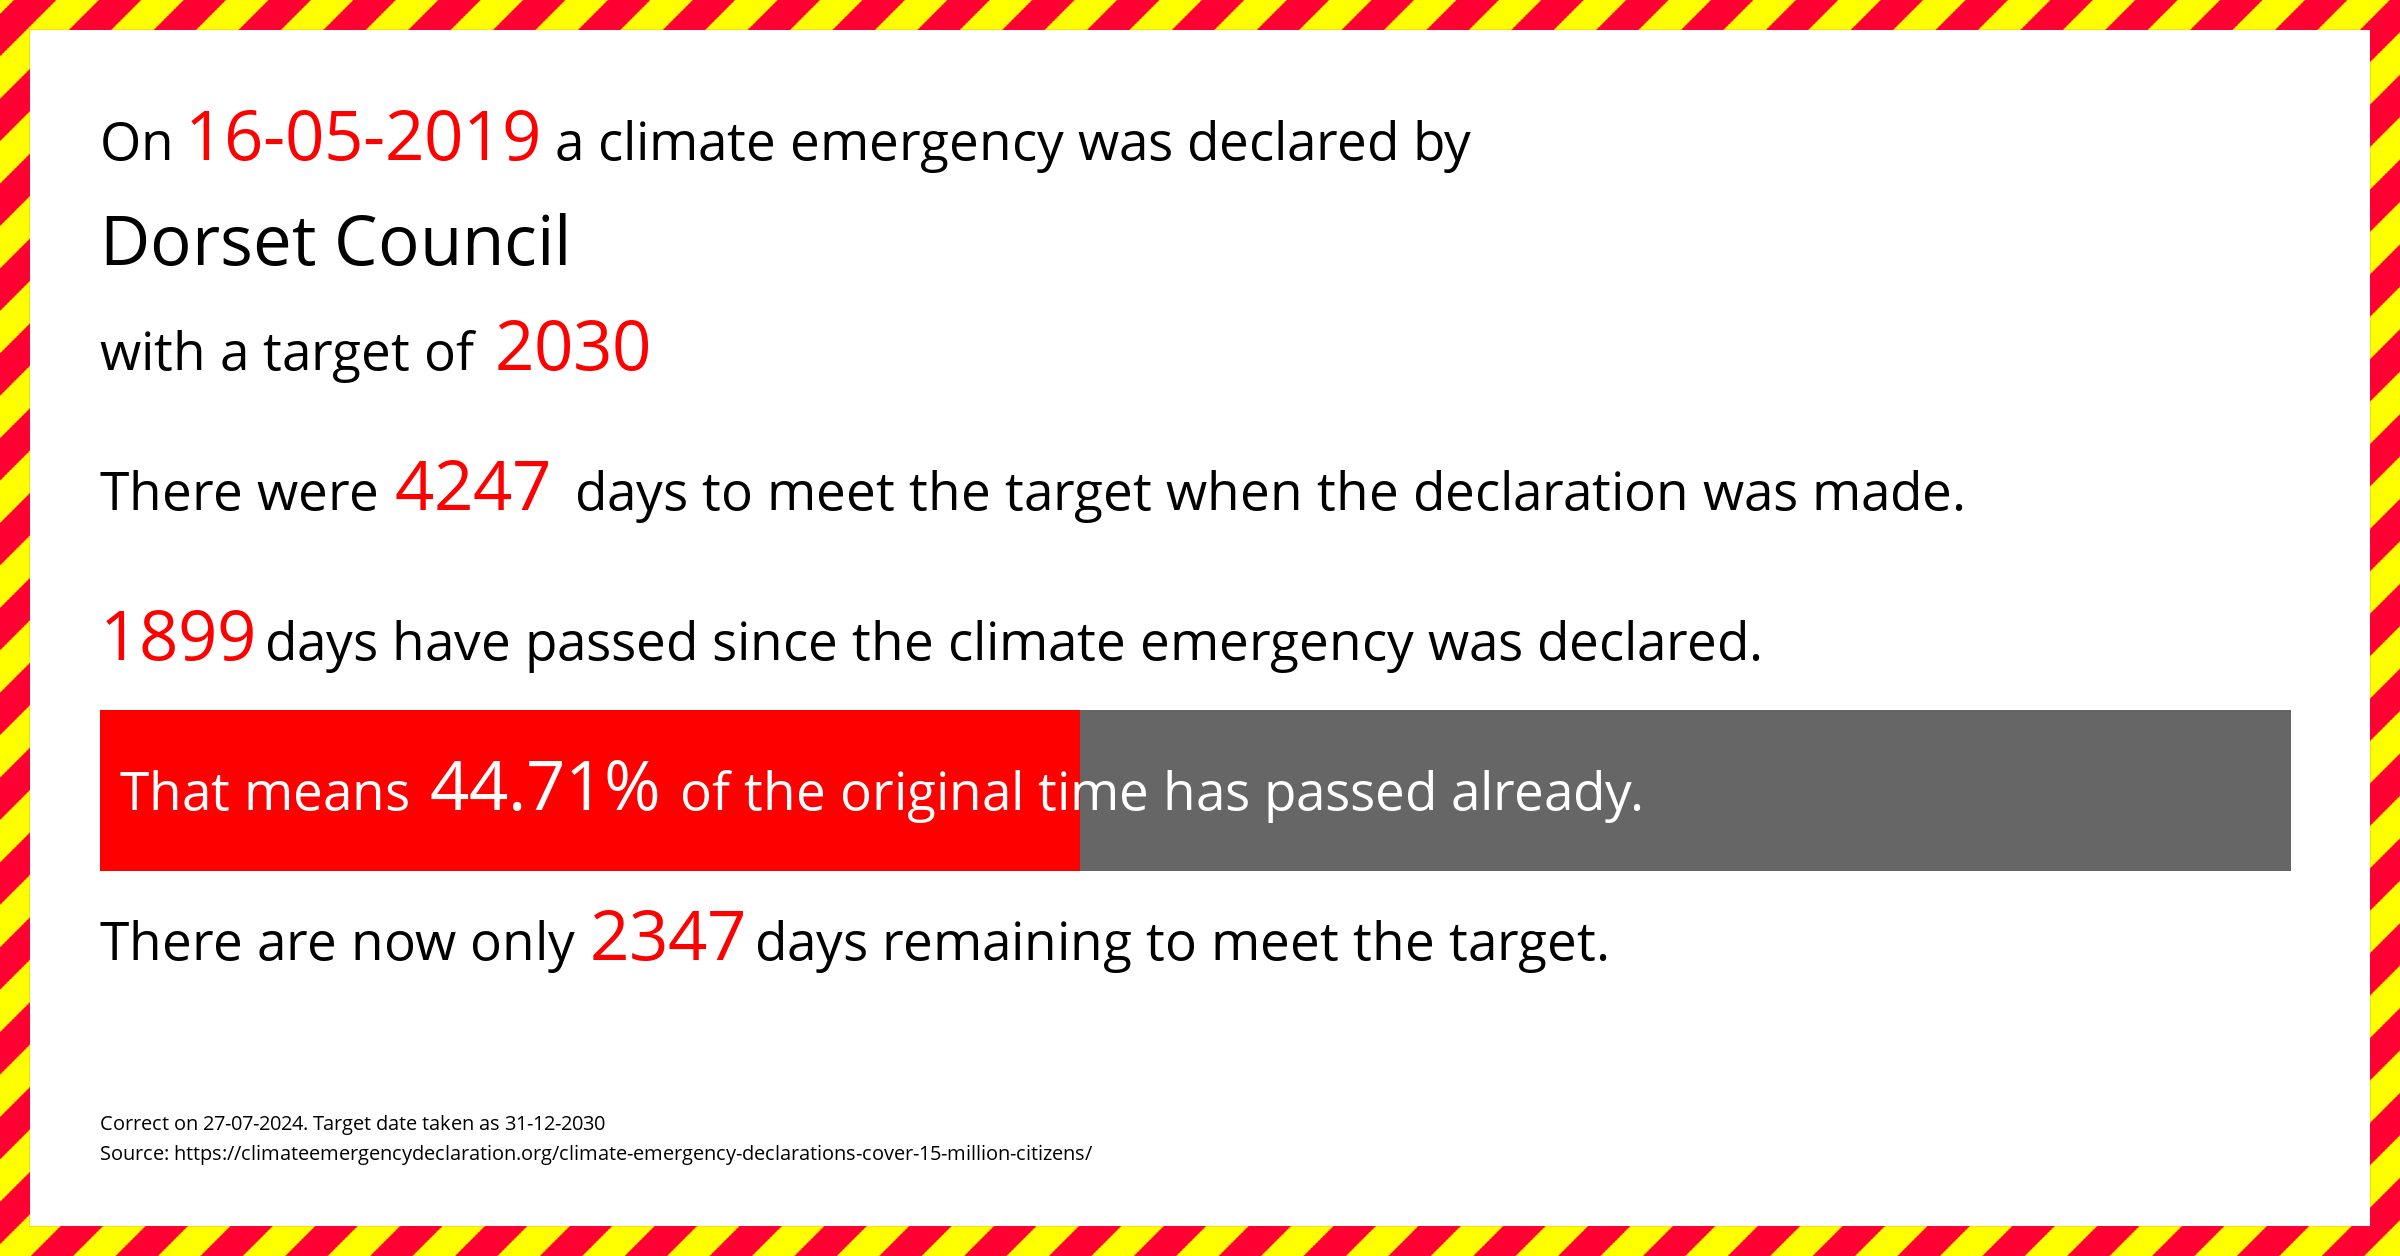 Dorset Council declared a Climate emergency on Thursday 16th May 2019, with a target of 2030.